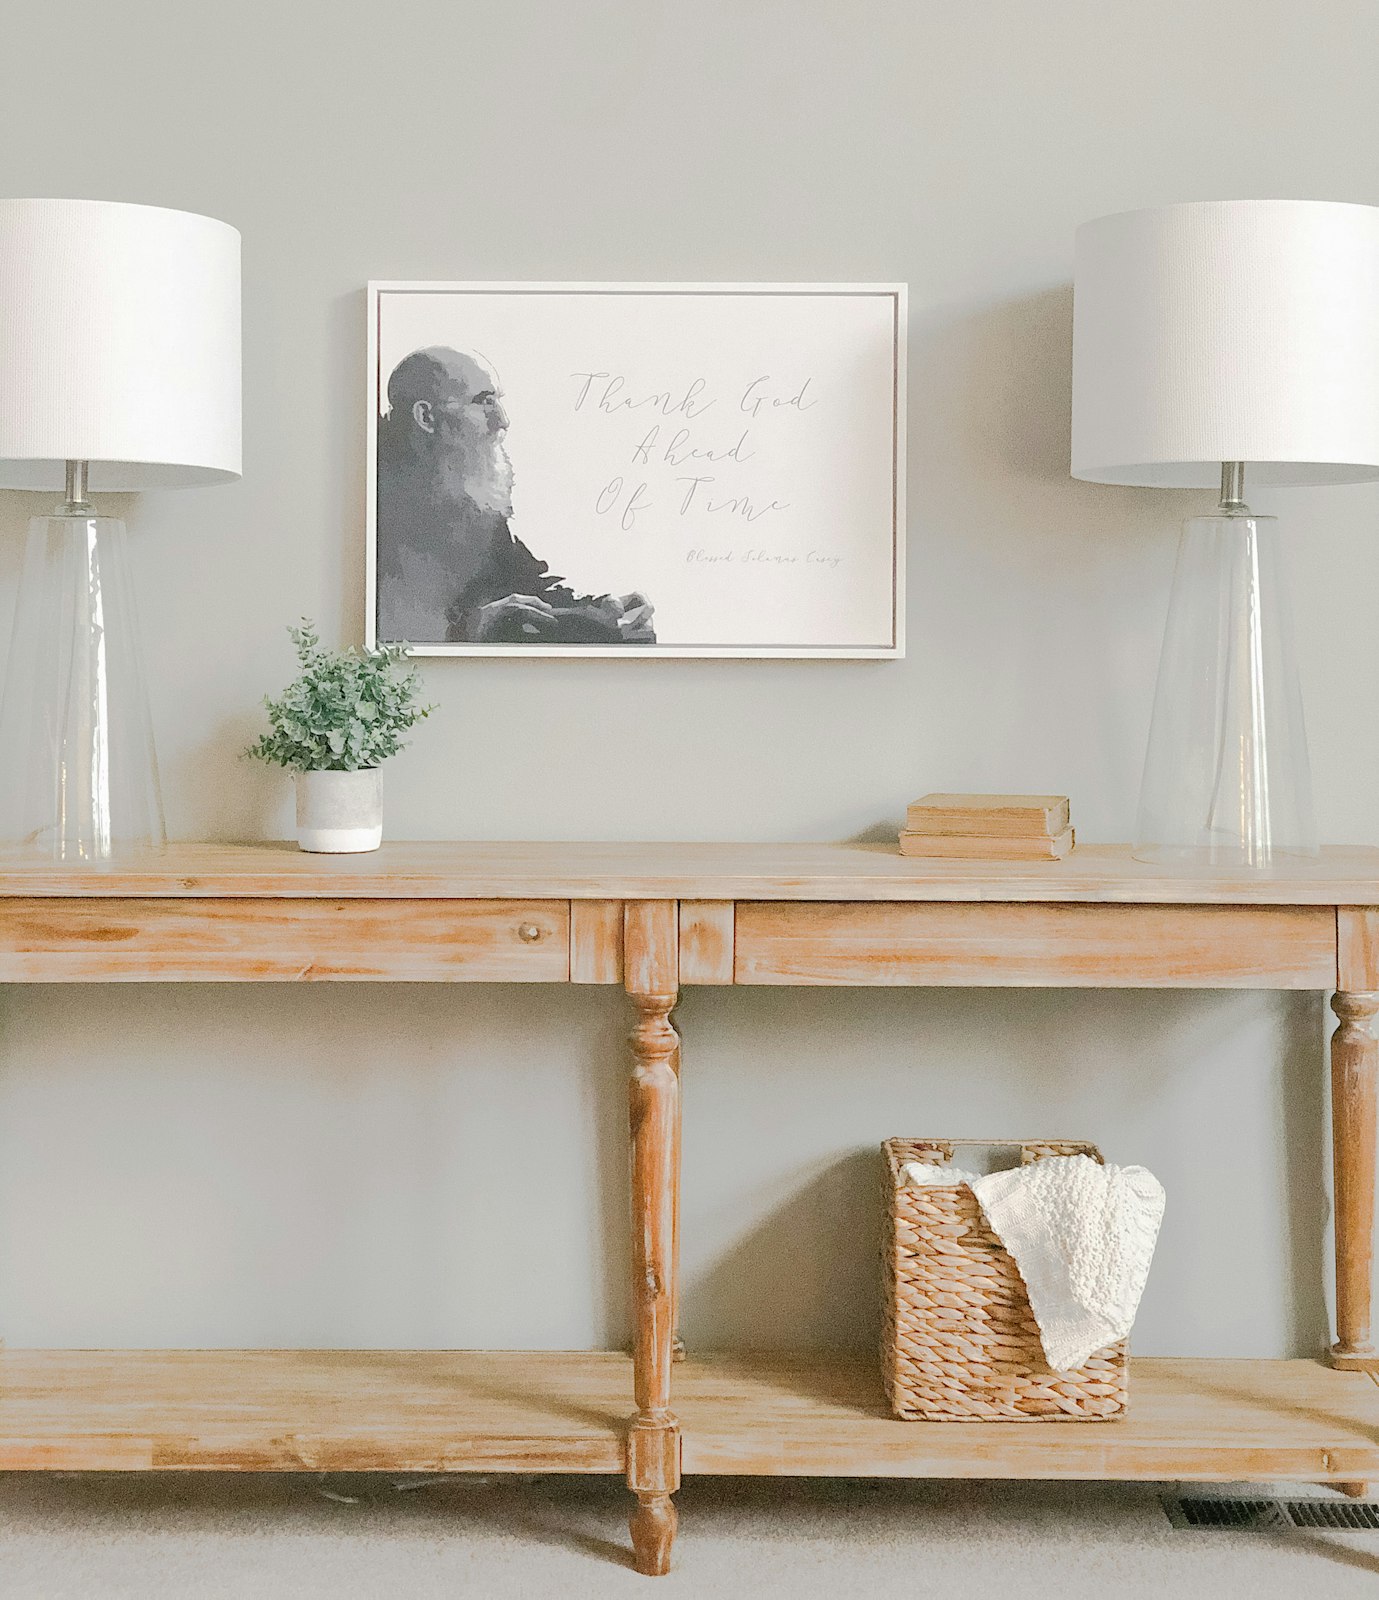 An image of Blessed Solanus Casey is depicted among home-décor items through Kidman's "House of Joppa" online shop.